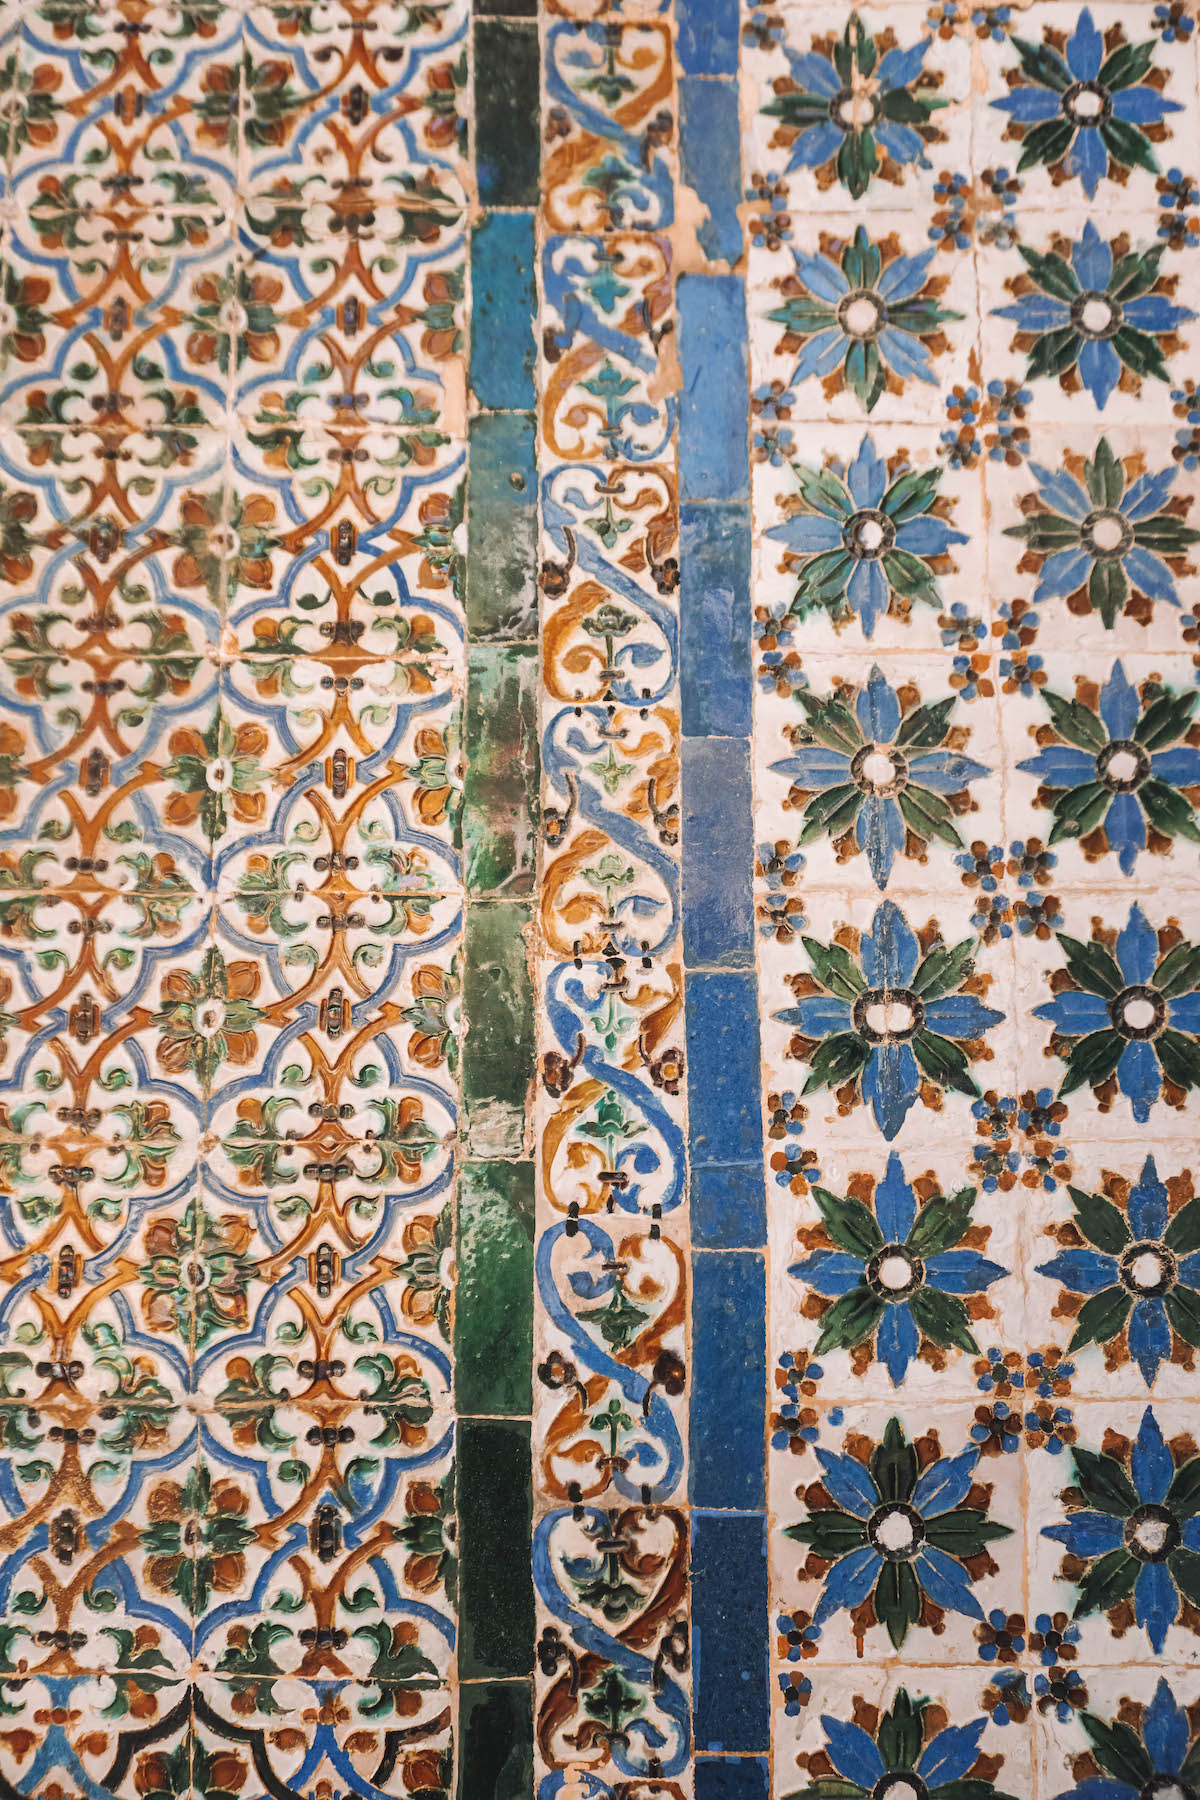 Colorful tiles on the walls of the Casa de Pilatos in Seville.